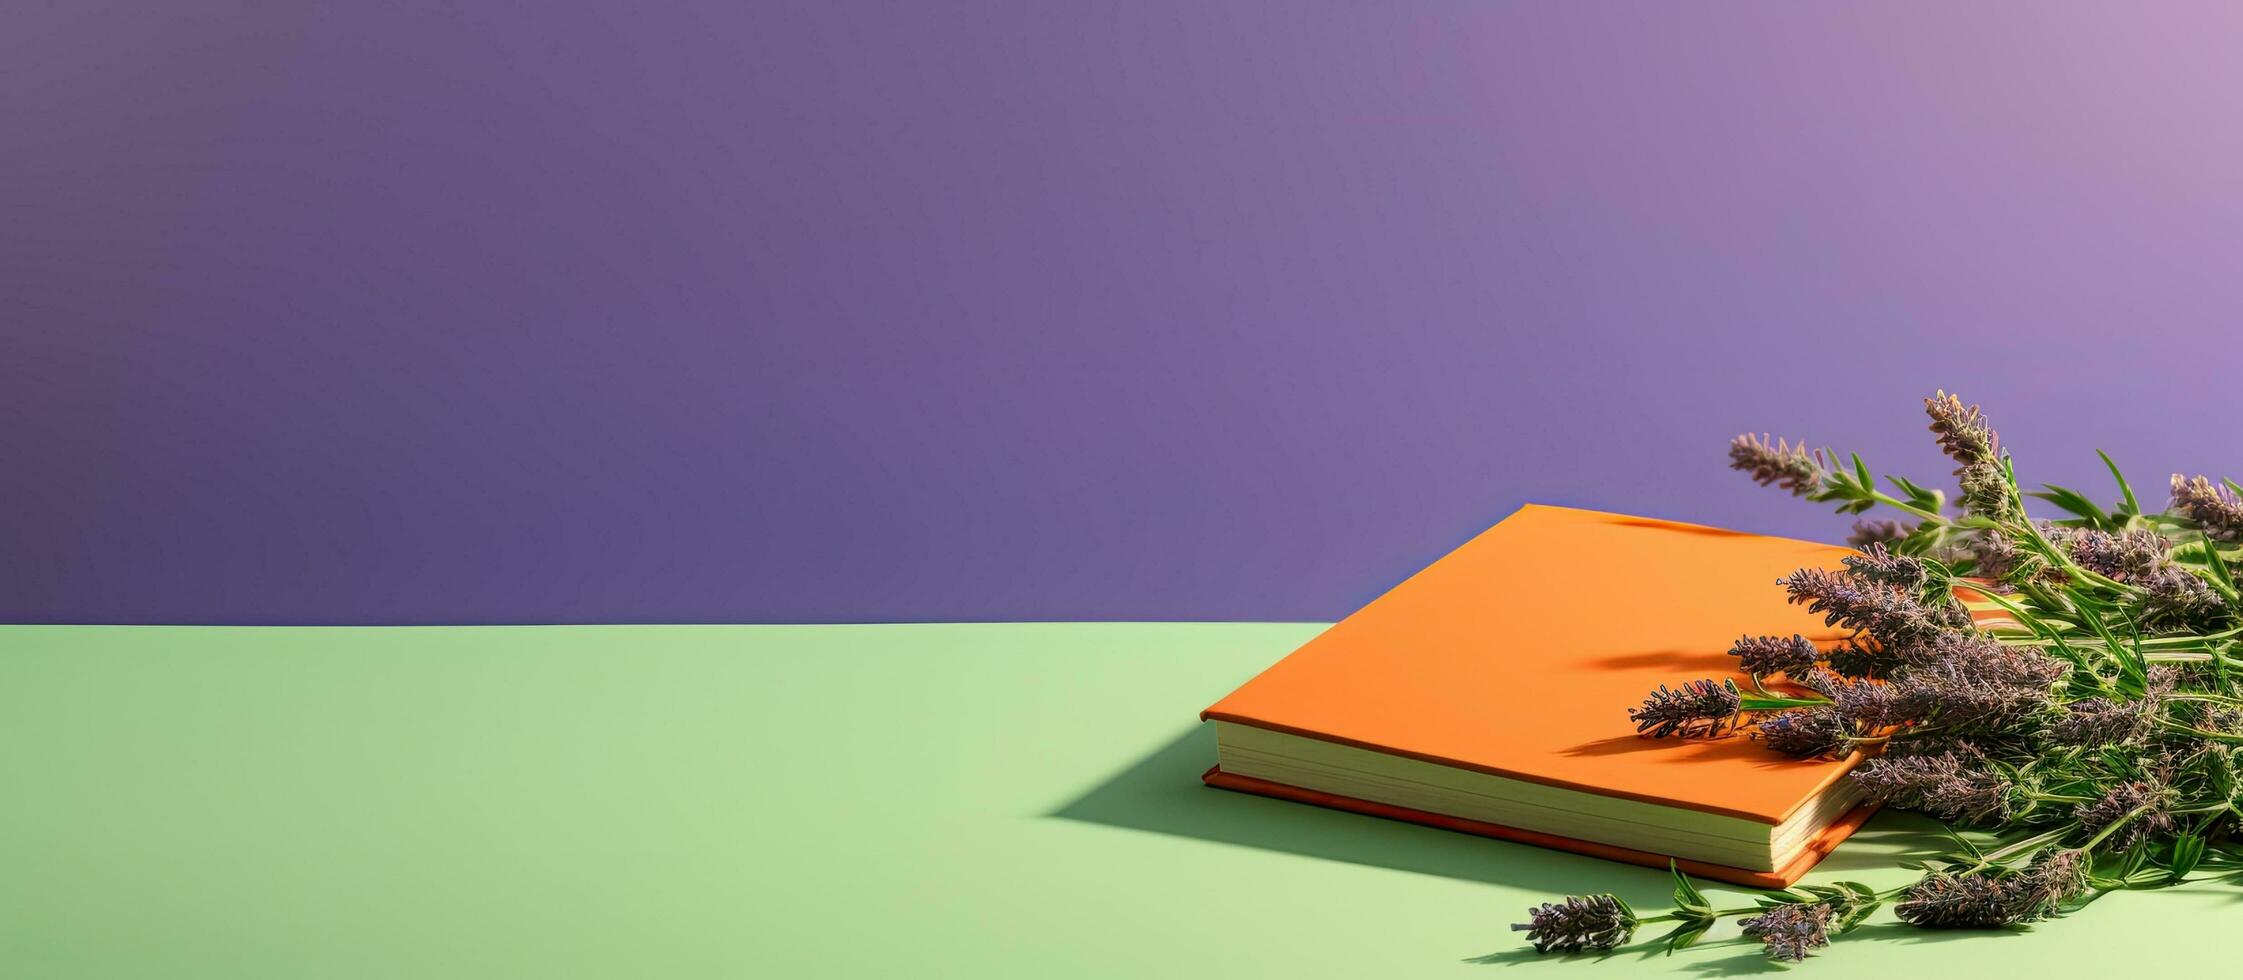 A banner with space for text featuring an orange book or notebook with lavender flowers inside, photo